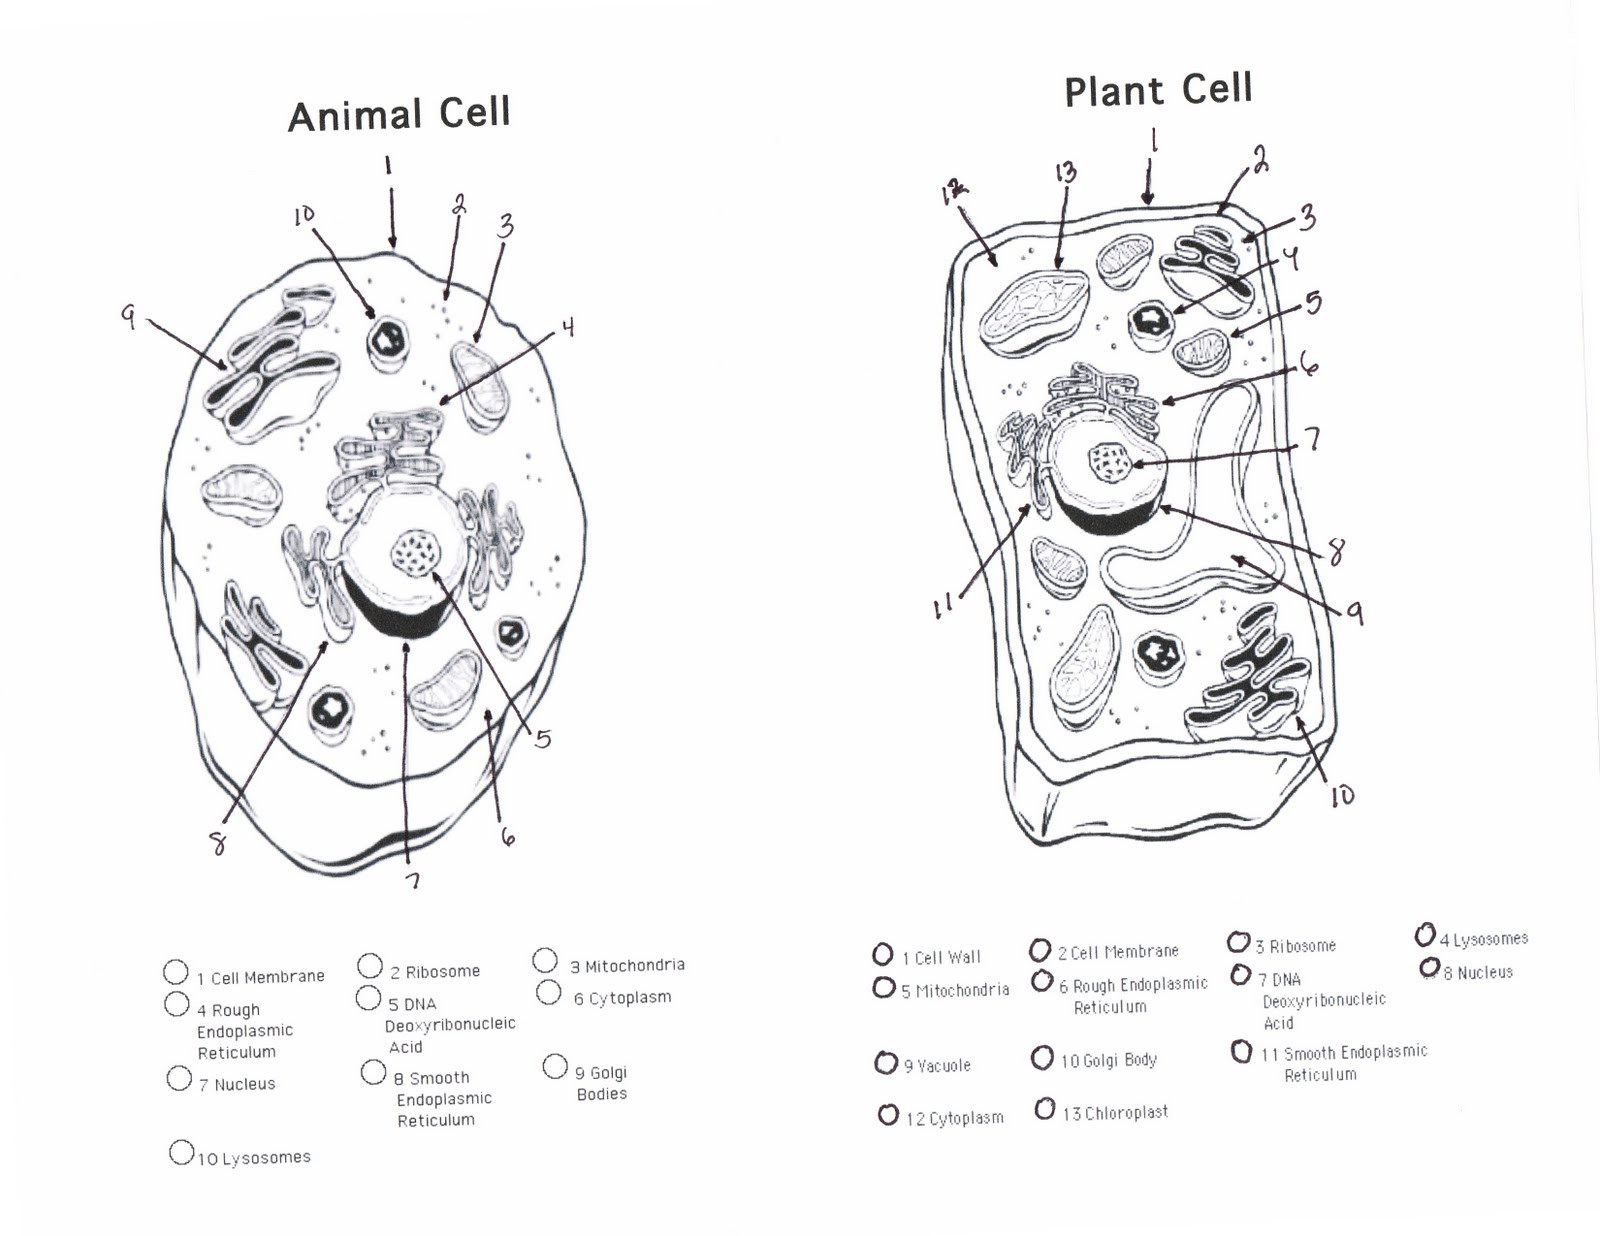 Animal and Plant Cell Coloring Sheet